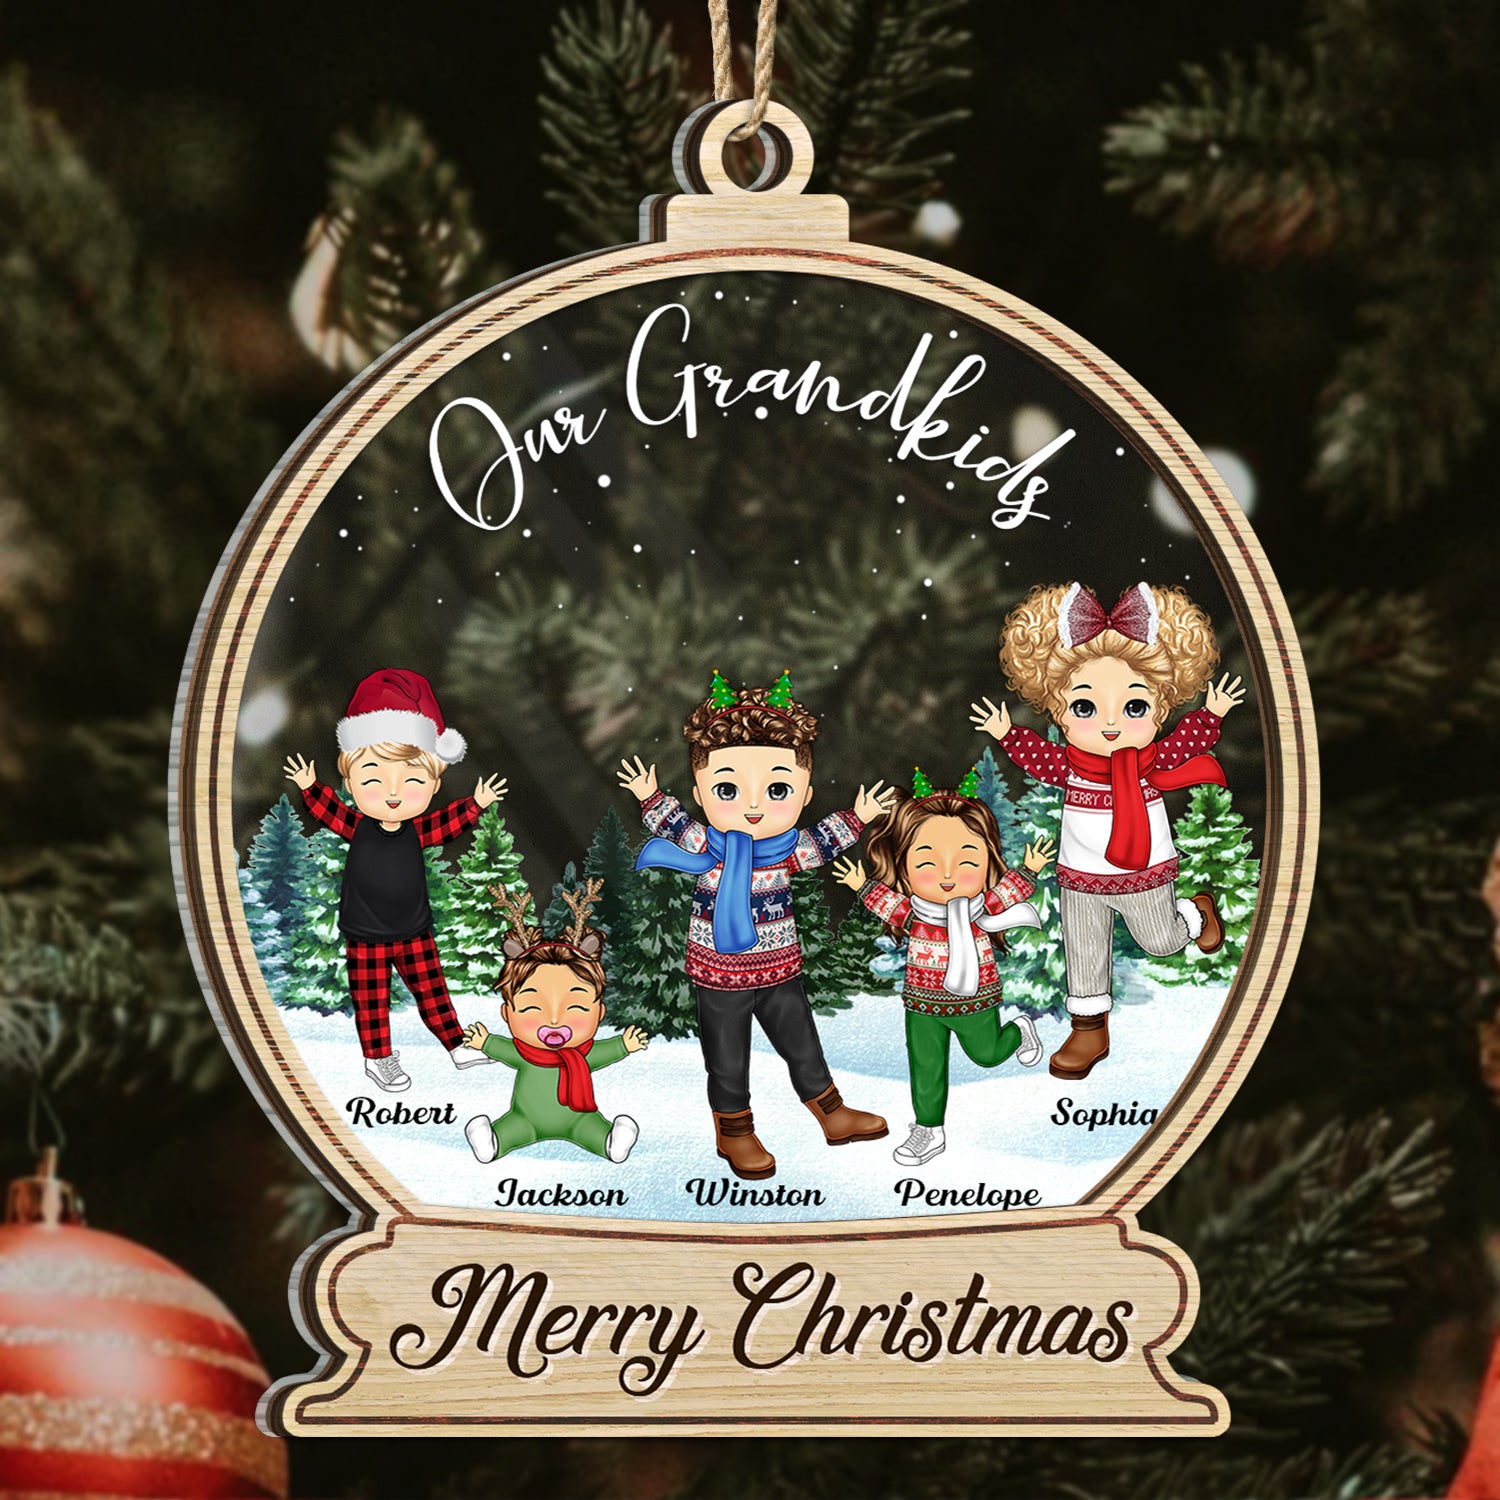 Happy Our Grandkids - Christmas Gift For Grandparents, Parents, Family - Personalized 2-Layered Mix Ornament